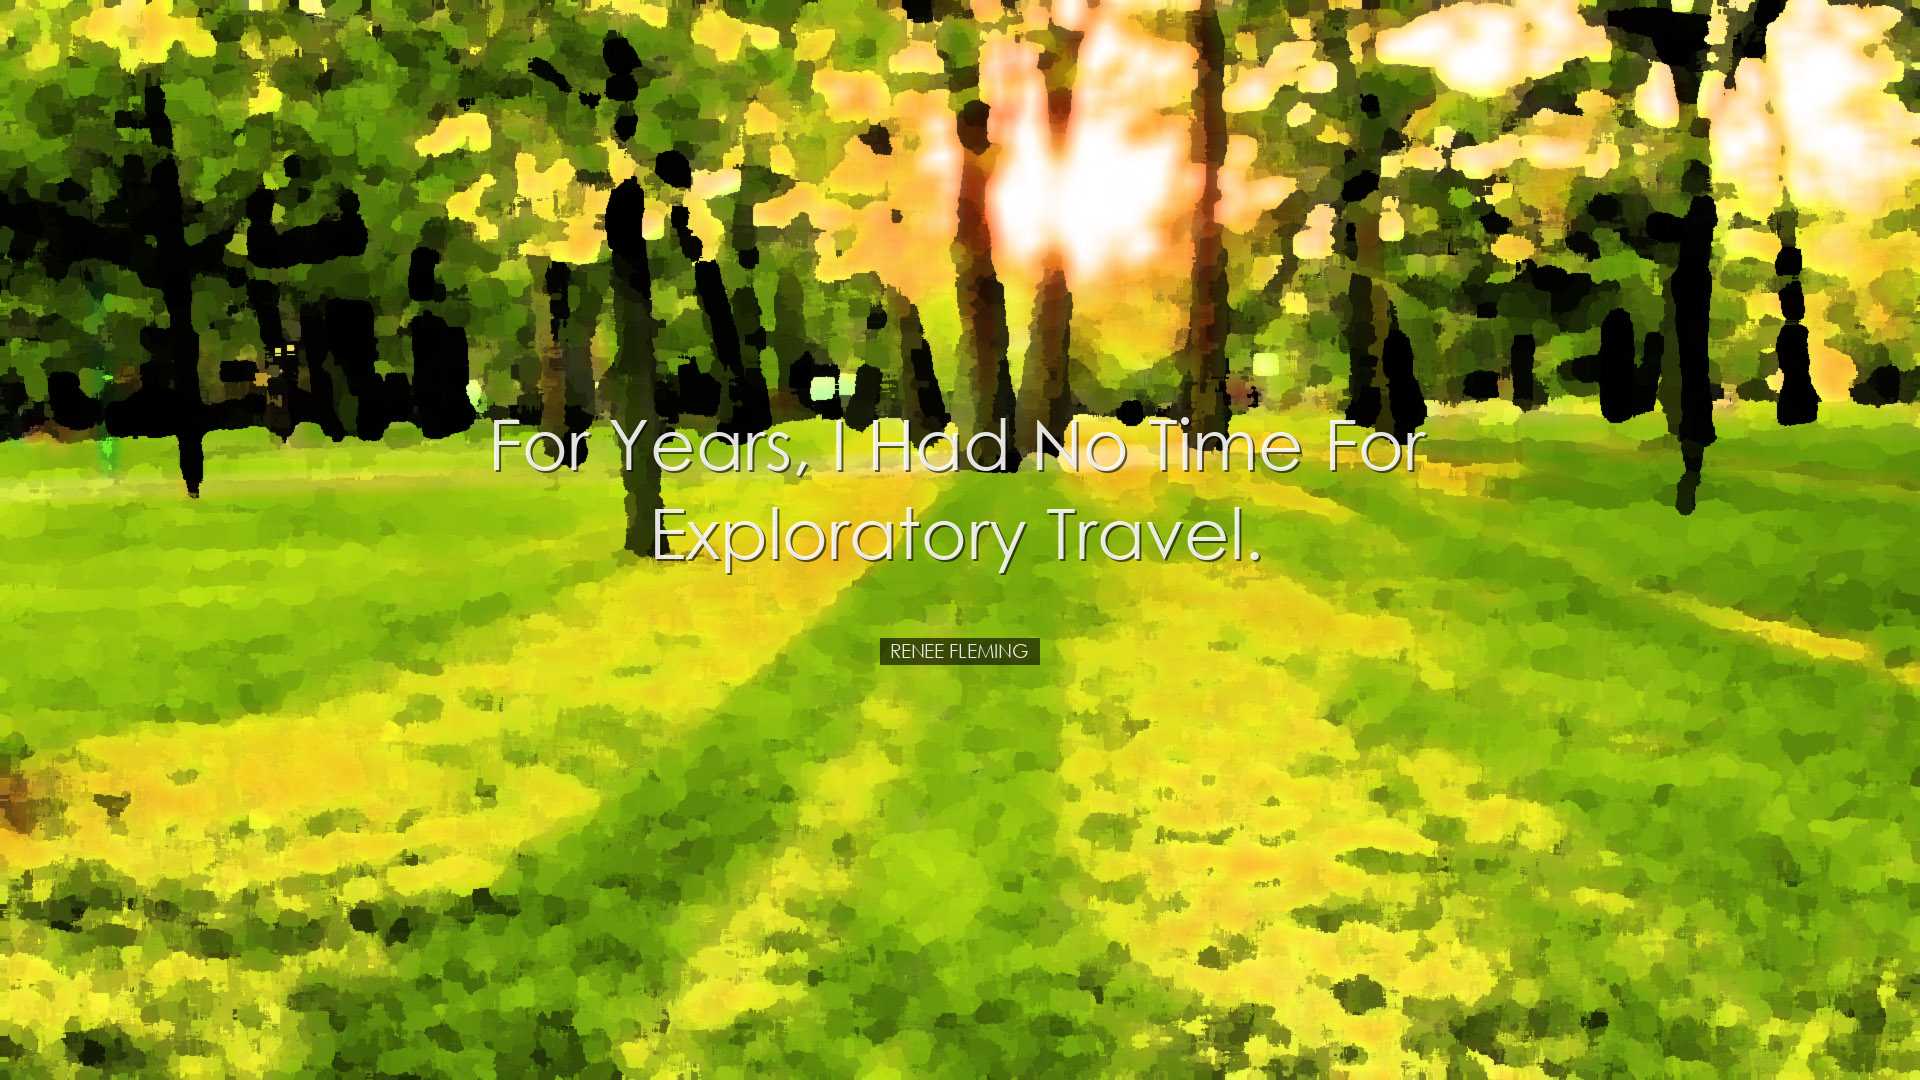 For years, I had no time for exploratory travel. - Renee Fleming